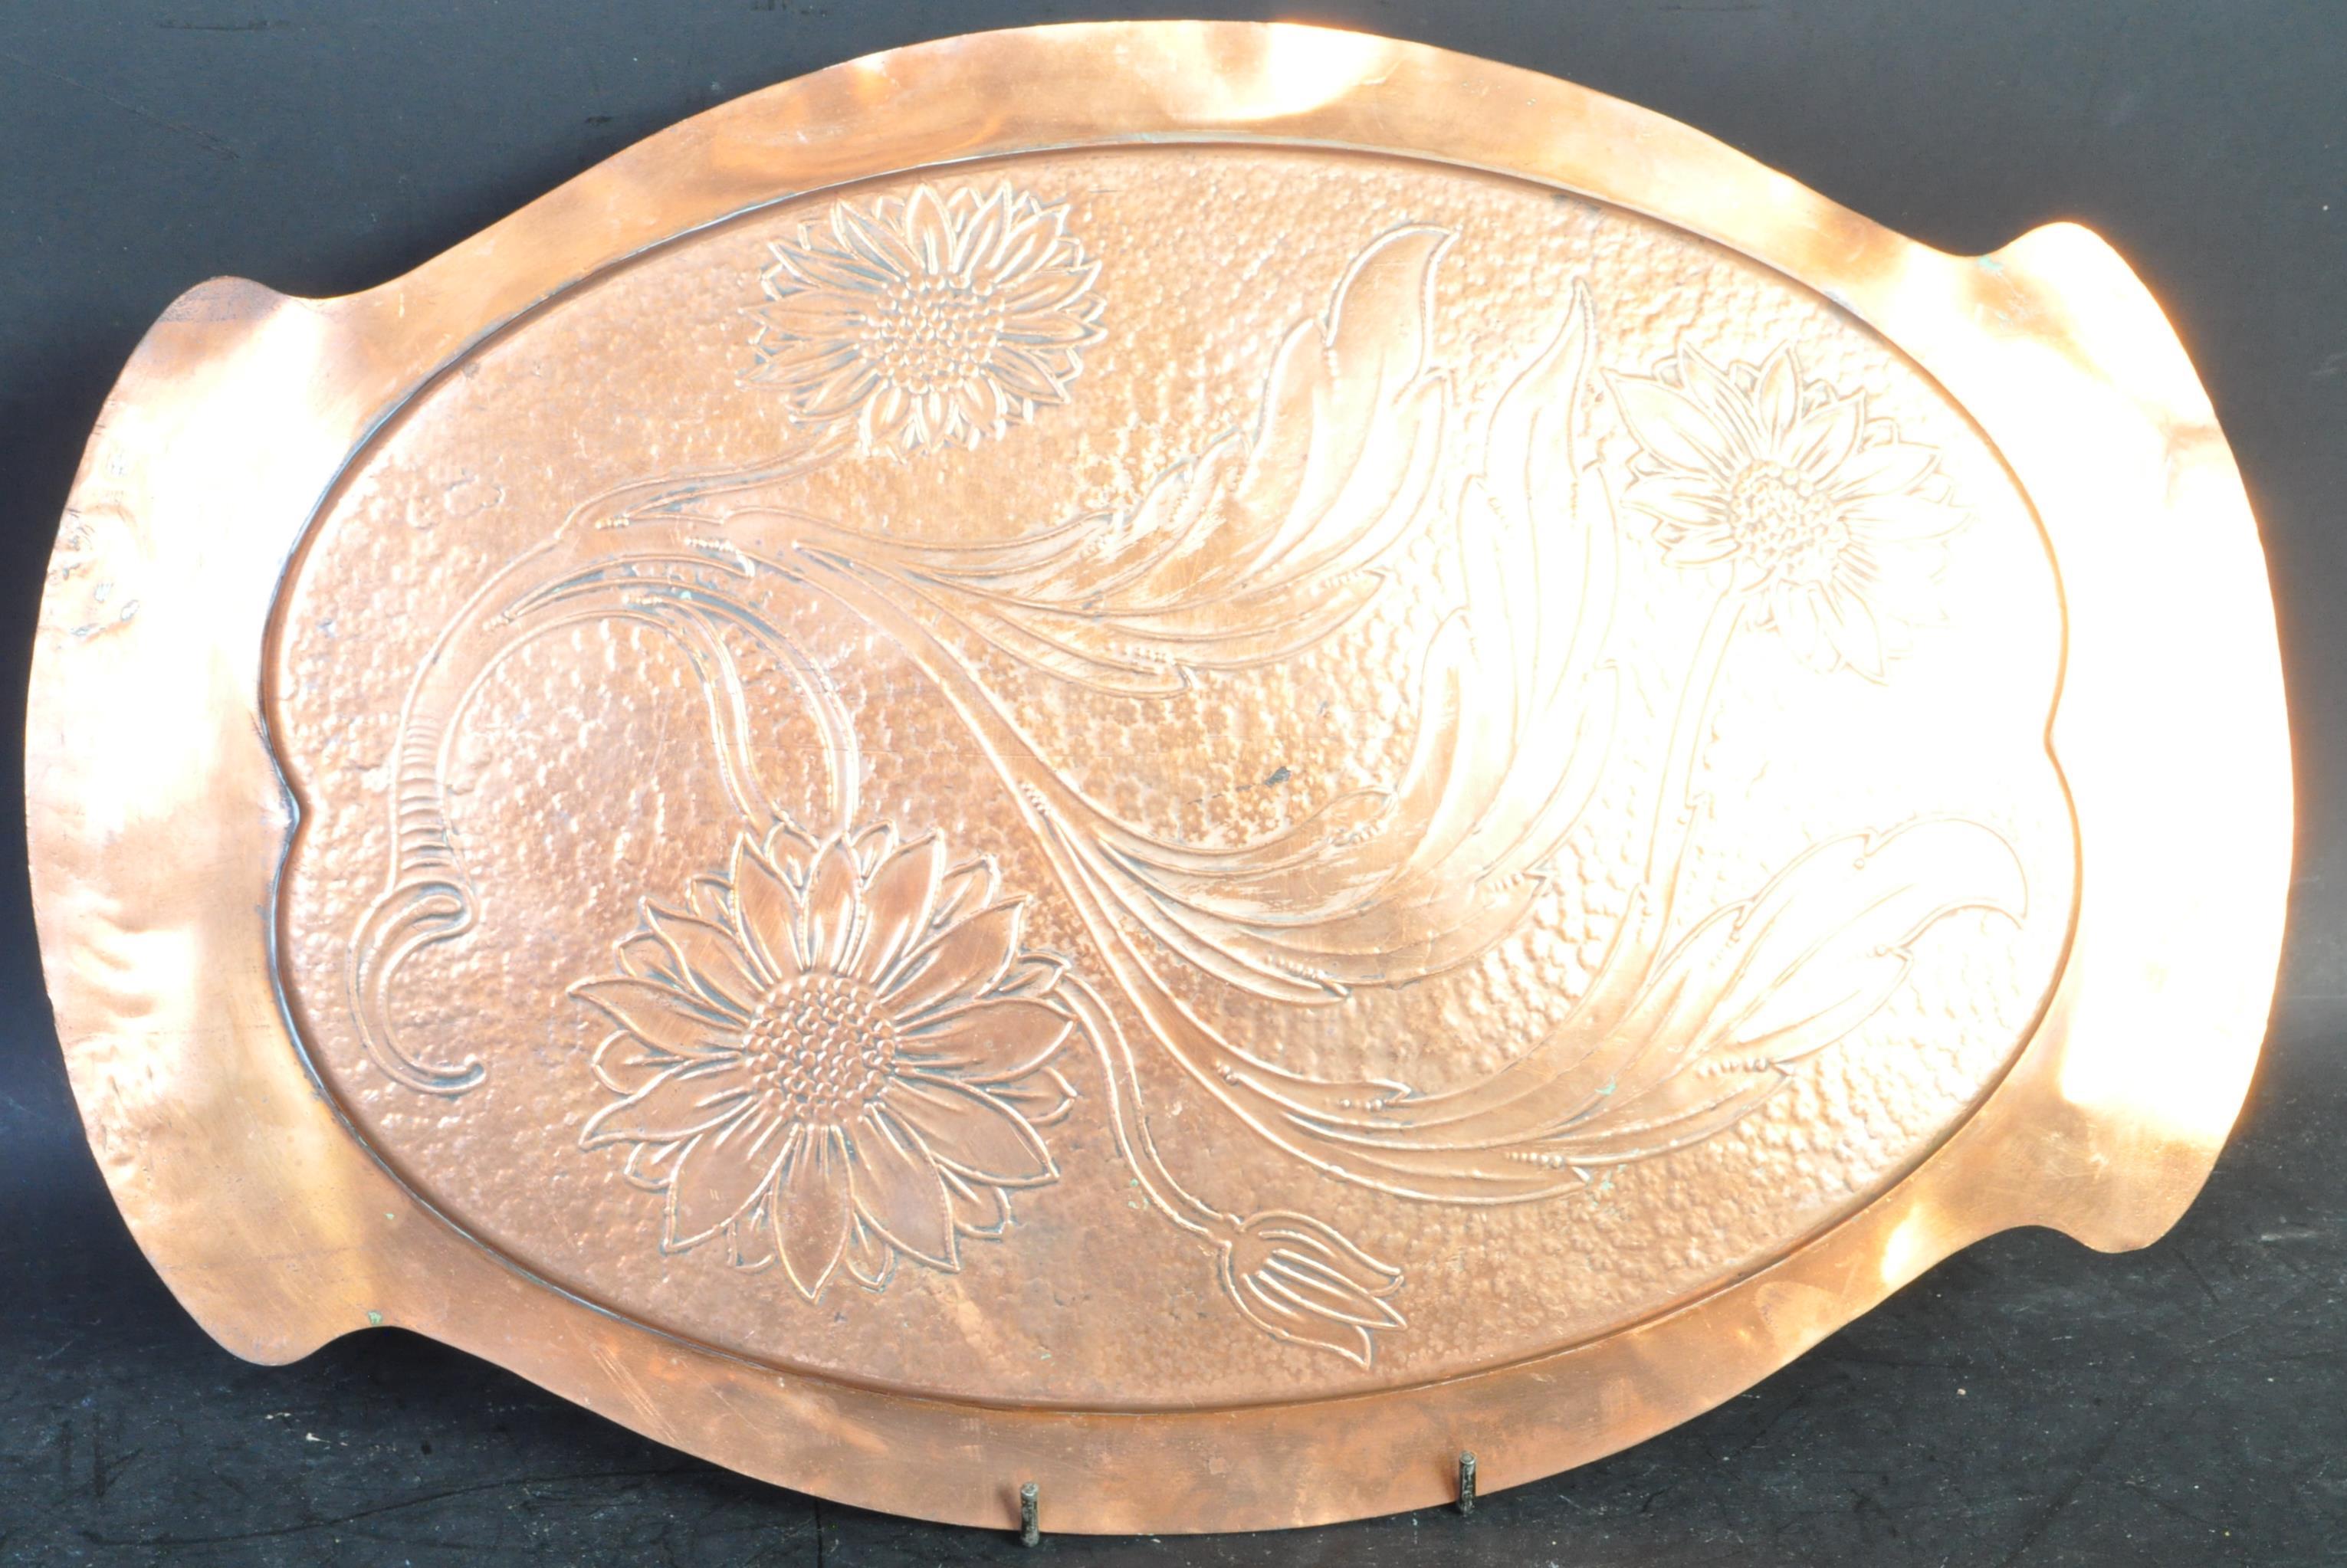 AN ART NOUVEAU ARTS & CRAFT BELDRAY COPPER TRAY - Image 4 of 4